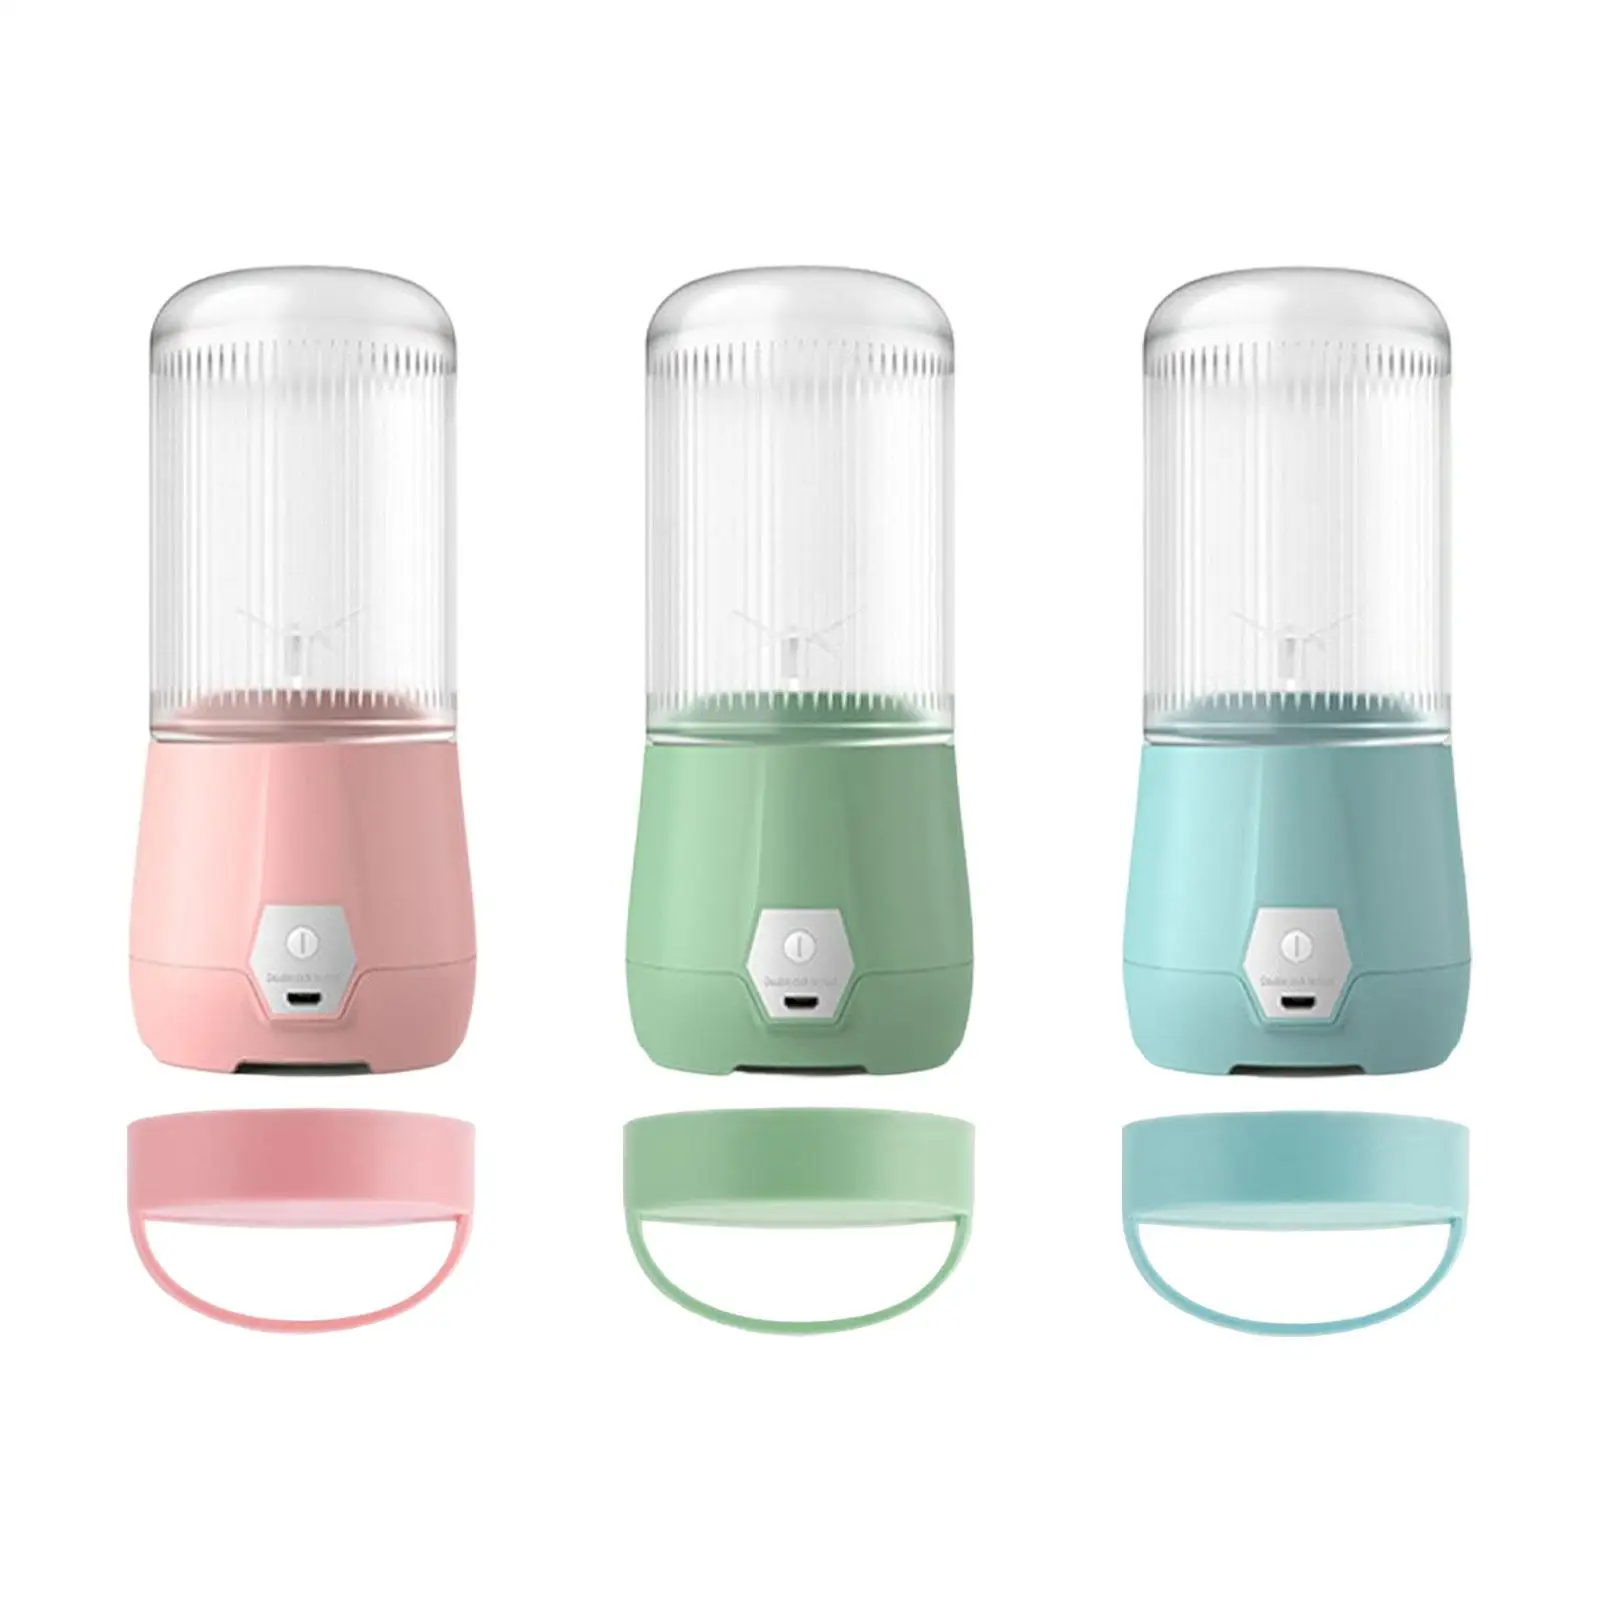 Portable Blender Juicer Cup Fruit Juice Mixer Machine Personal Size Blenders for Milk Shakes Travel Birthday Gift Kitchen